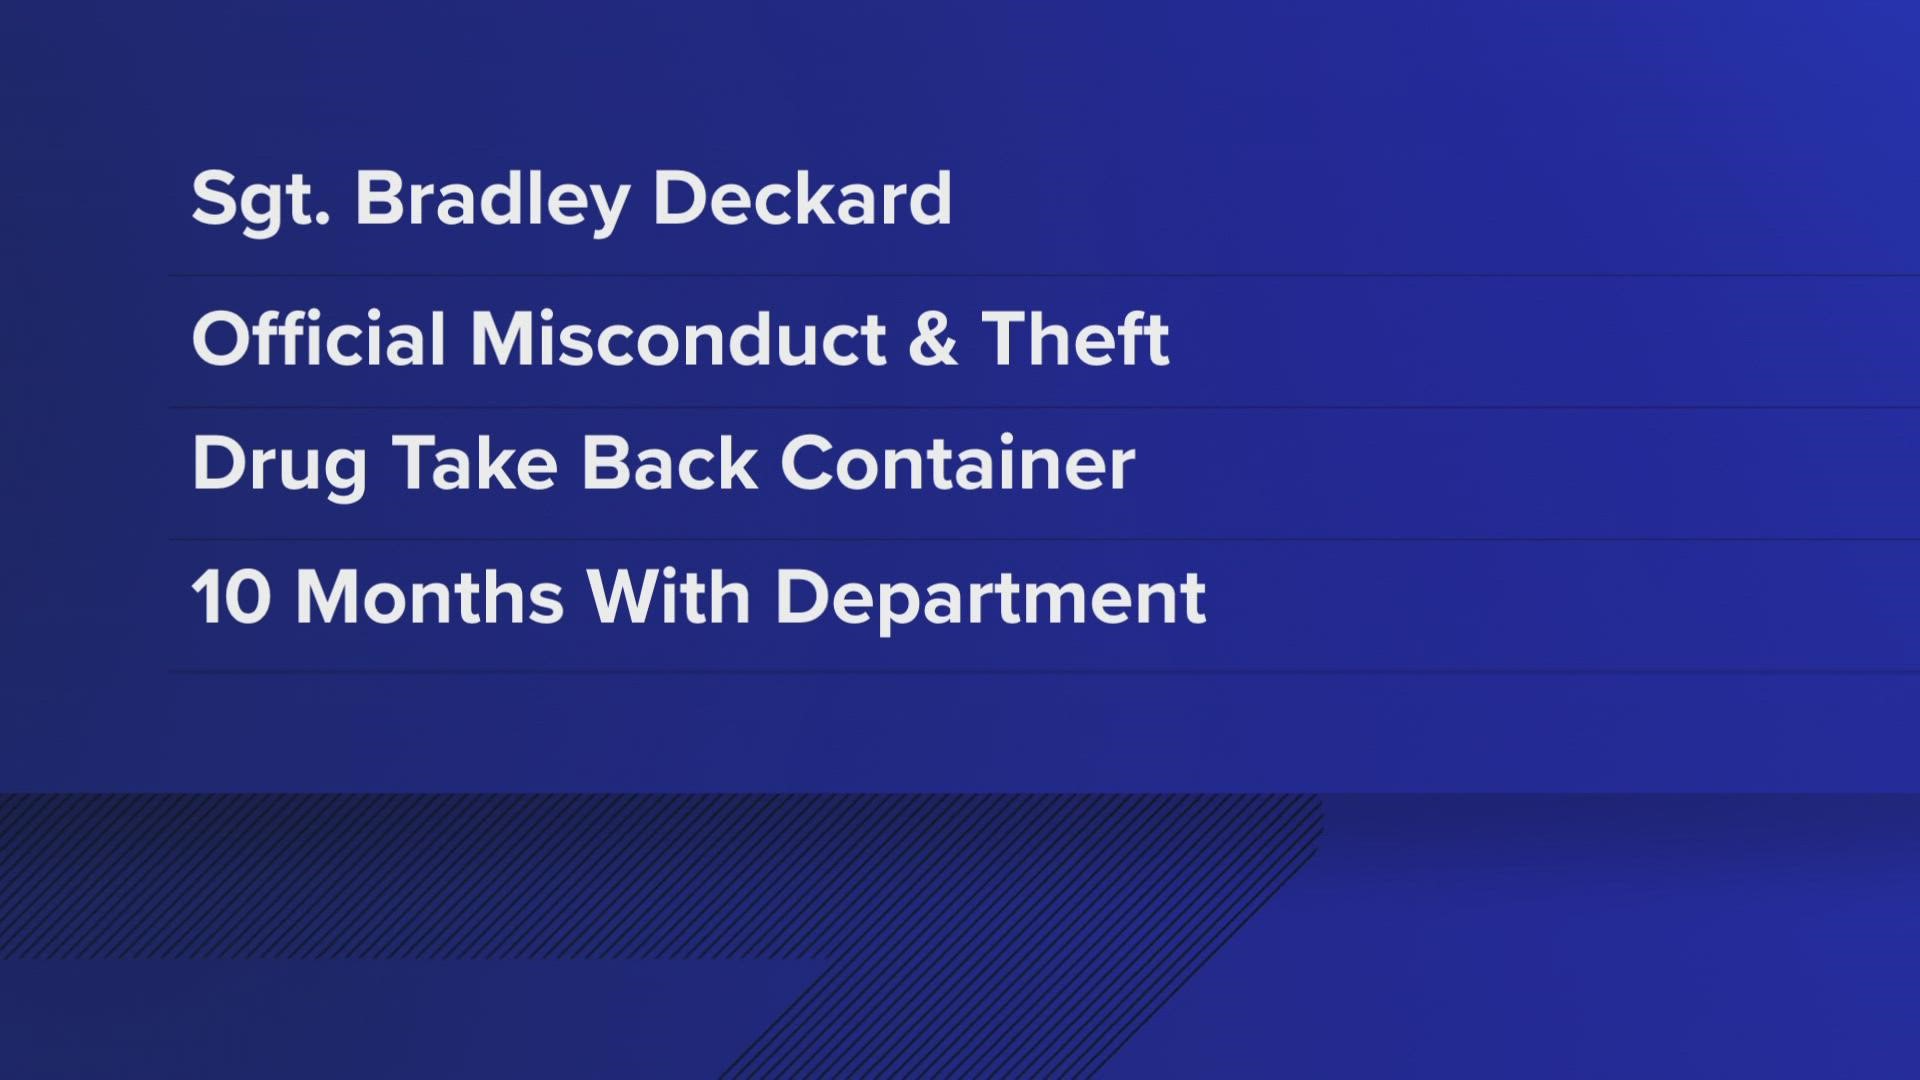 A Spencer, Indiana police officer was arrested Friday for stealing drugs from police storage, Indiana State Police said.